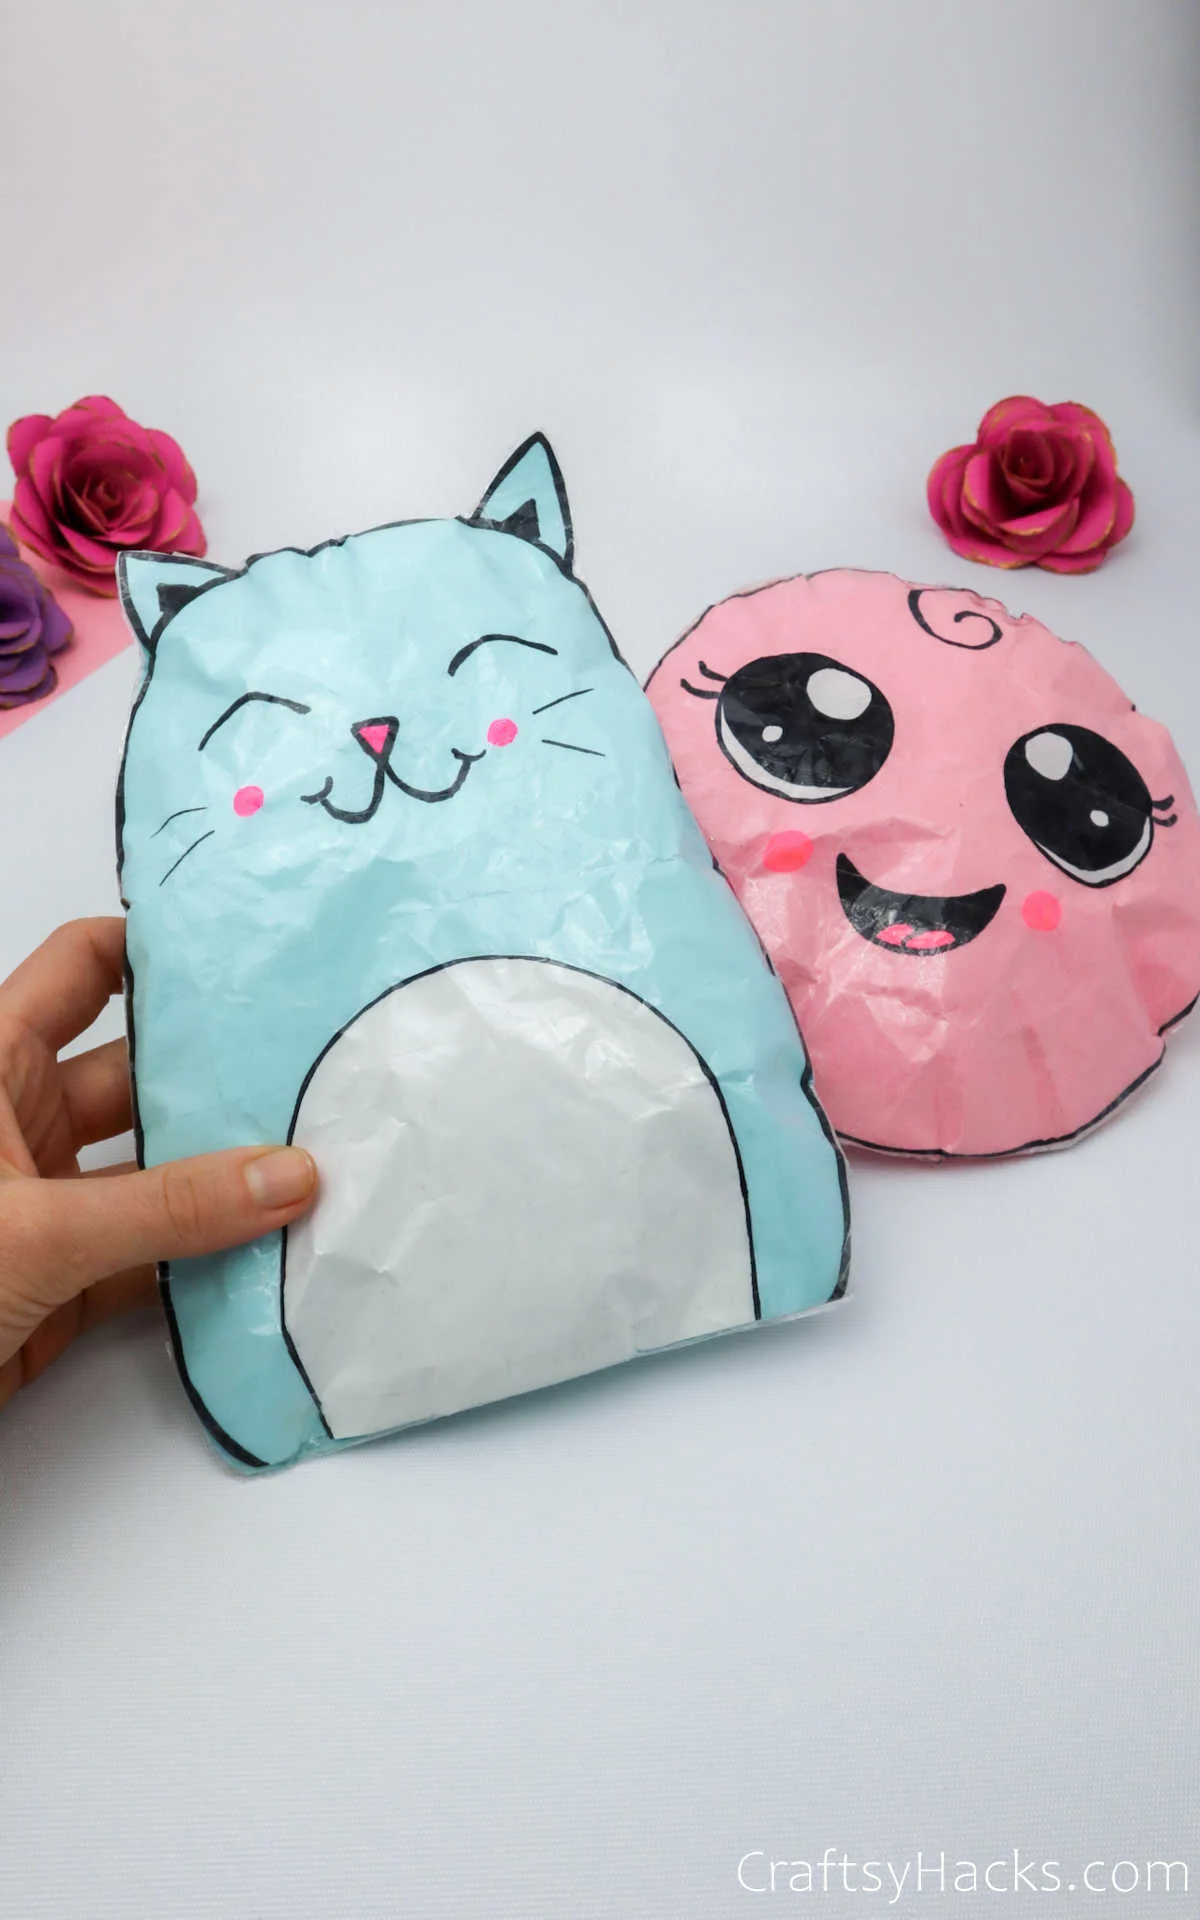 How to Make Paper Squishies Tutorial) - Craftsy